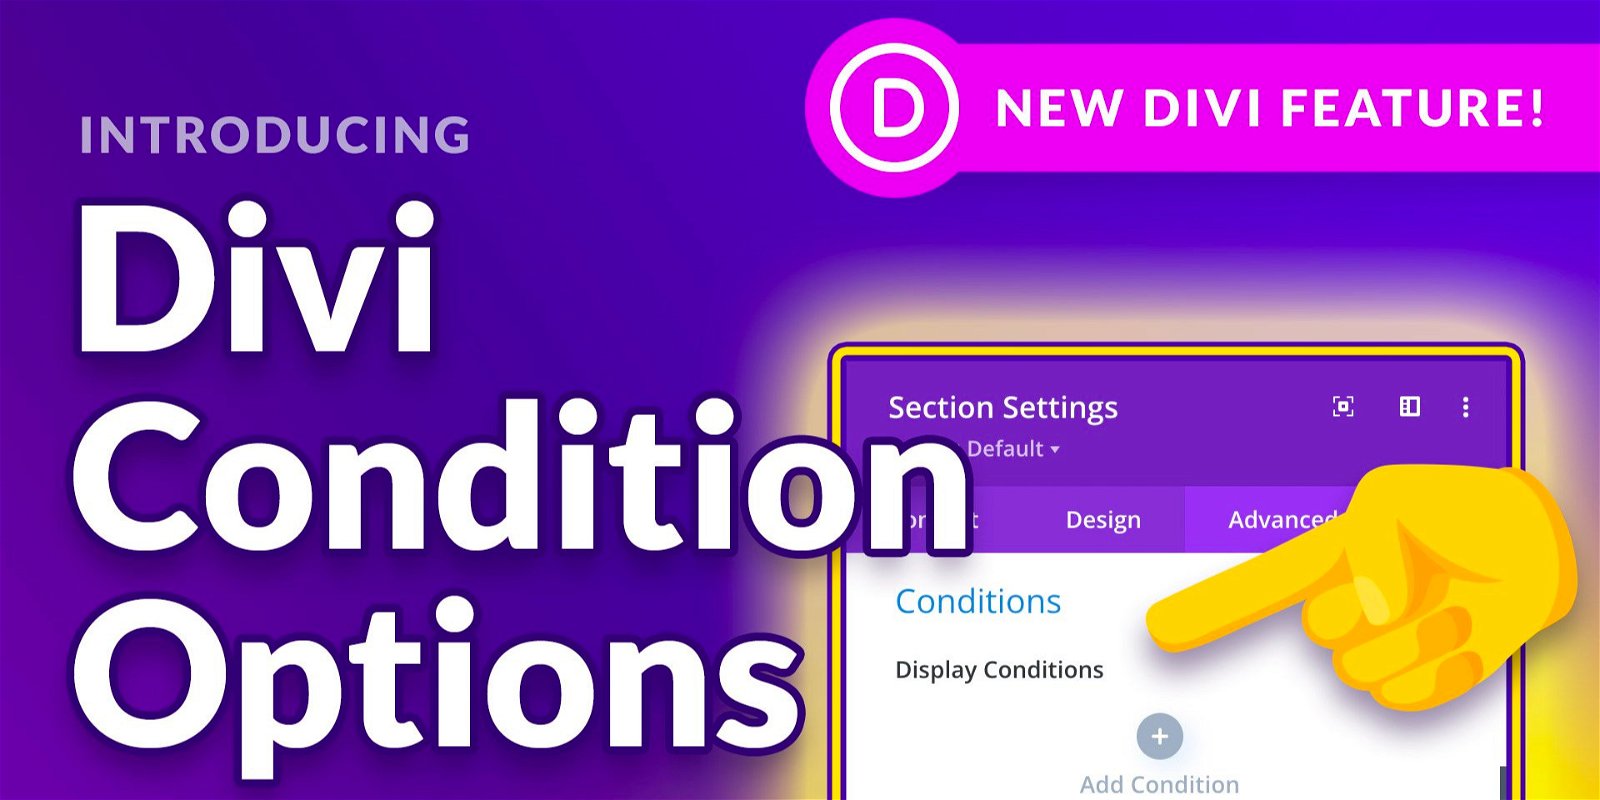 Condition Options